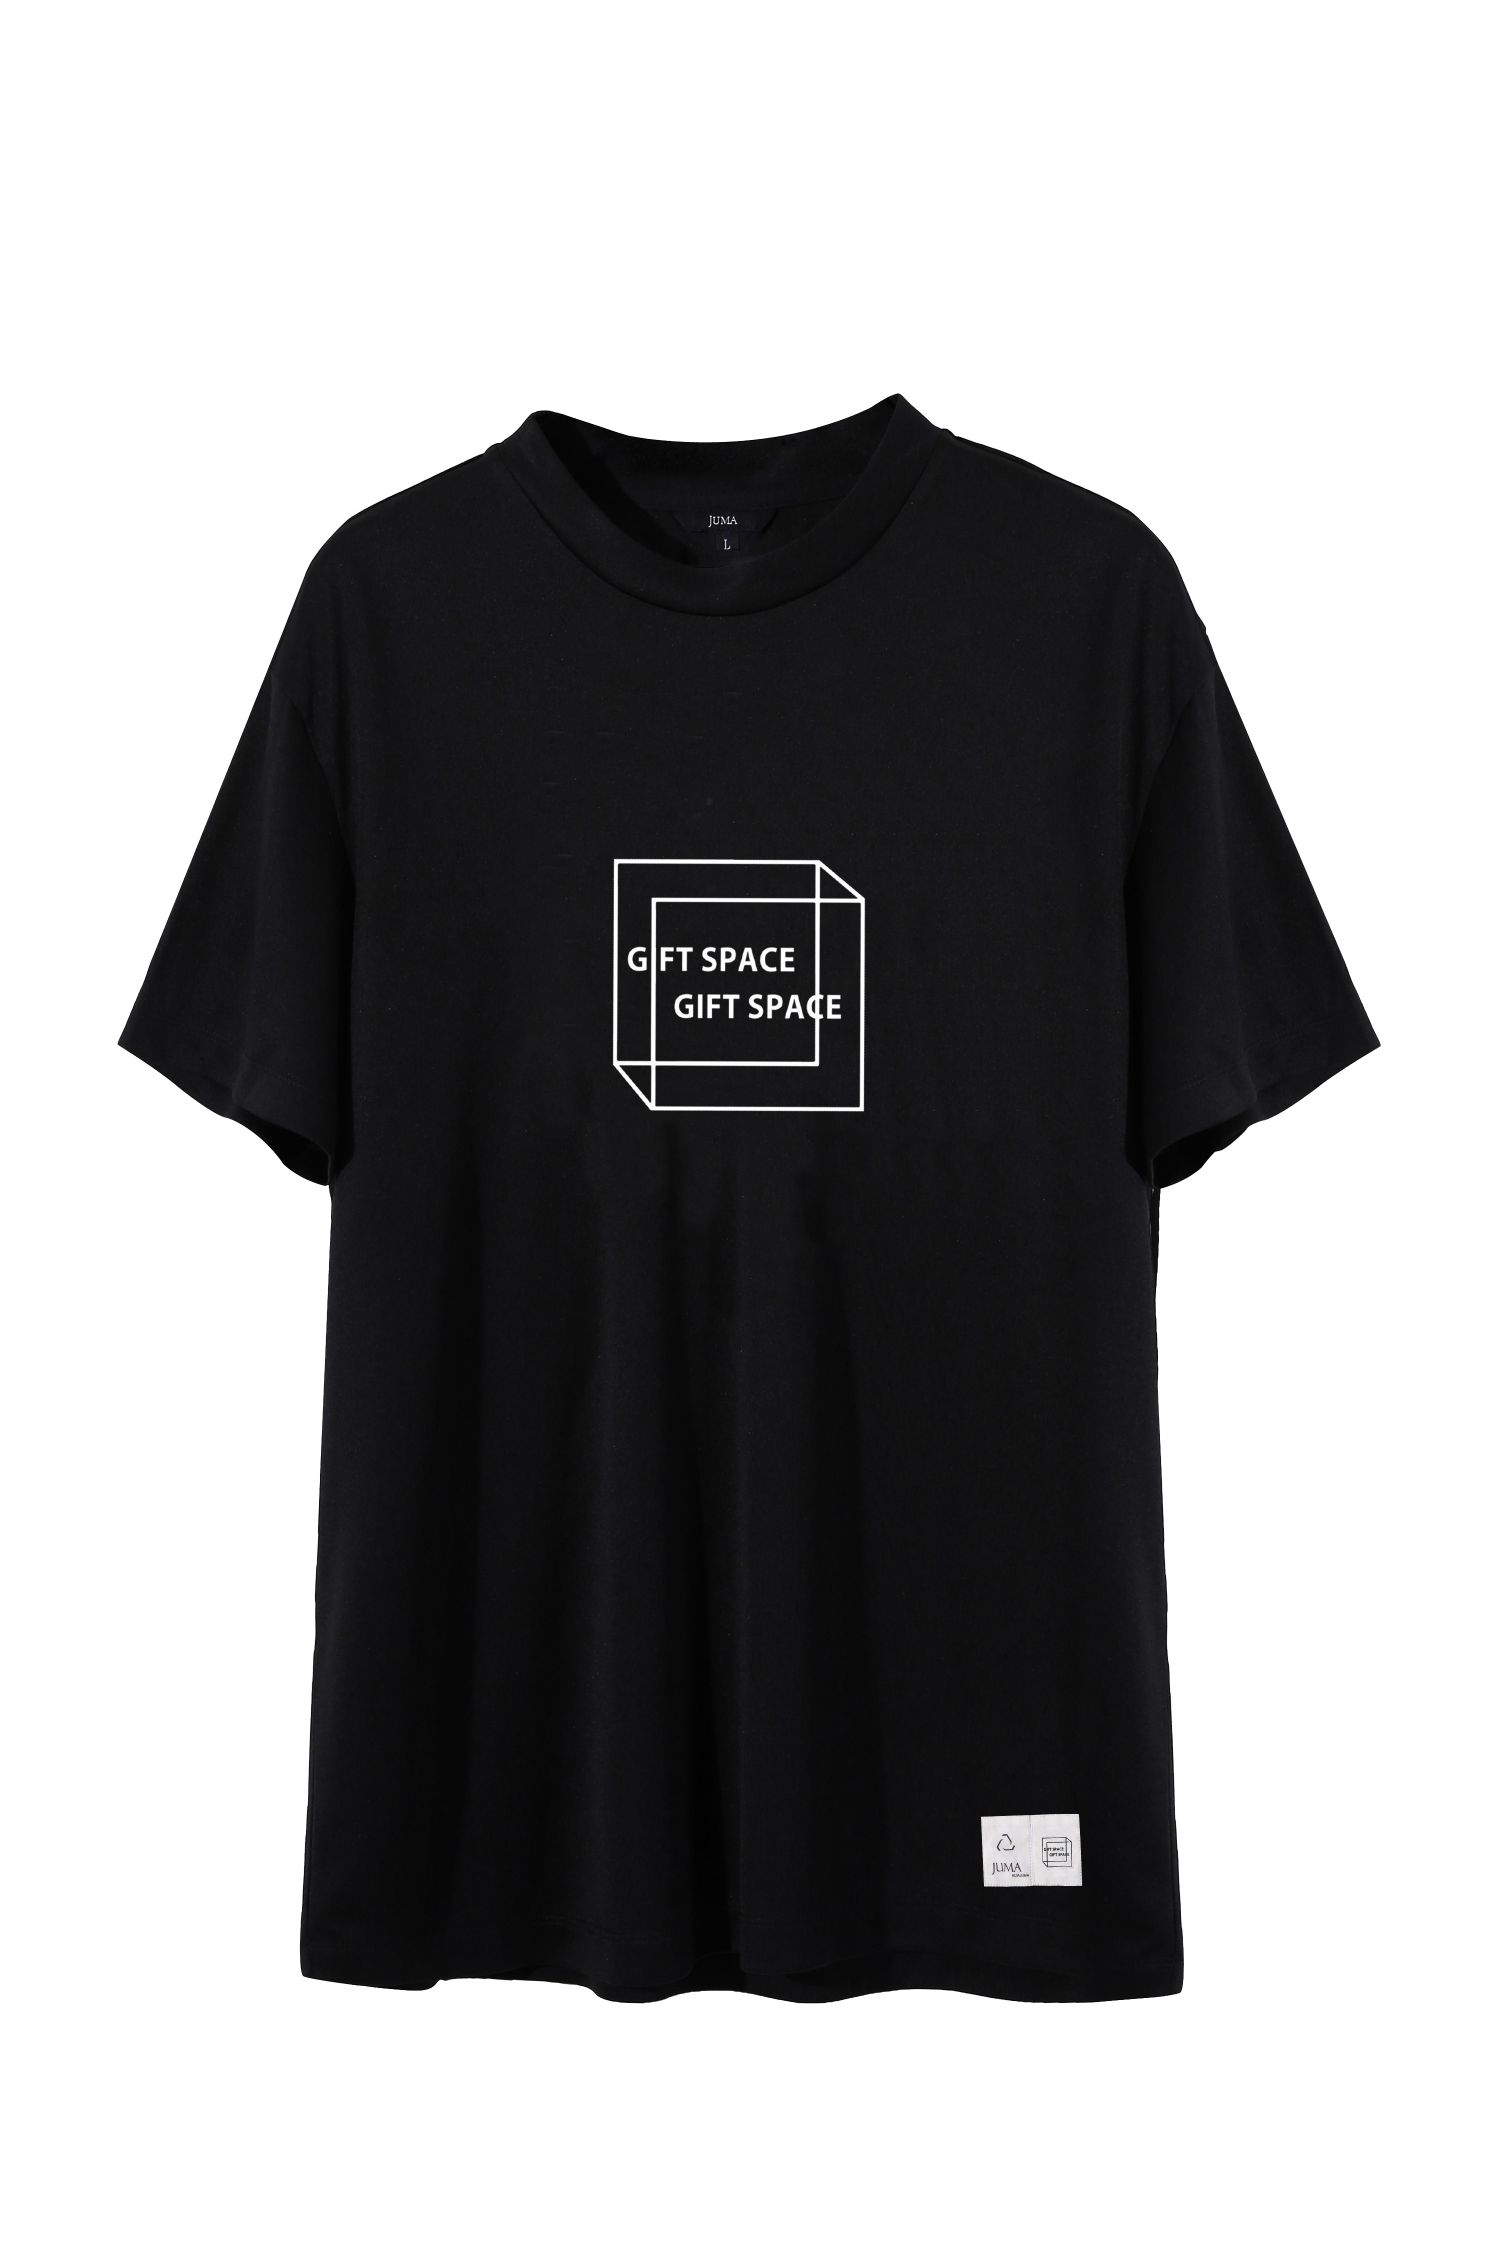 Gift Space T恤 - 4 个回收水瓶 - 黑色｜Gift Space Printed T-Shirt - 4 Recycled Water Bottles -Black